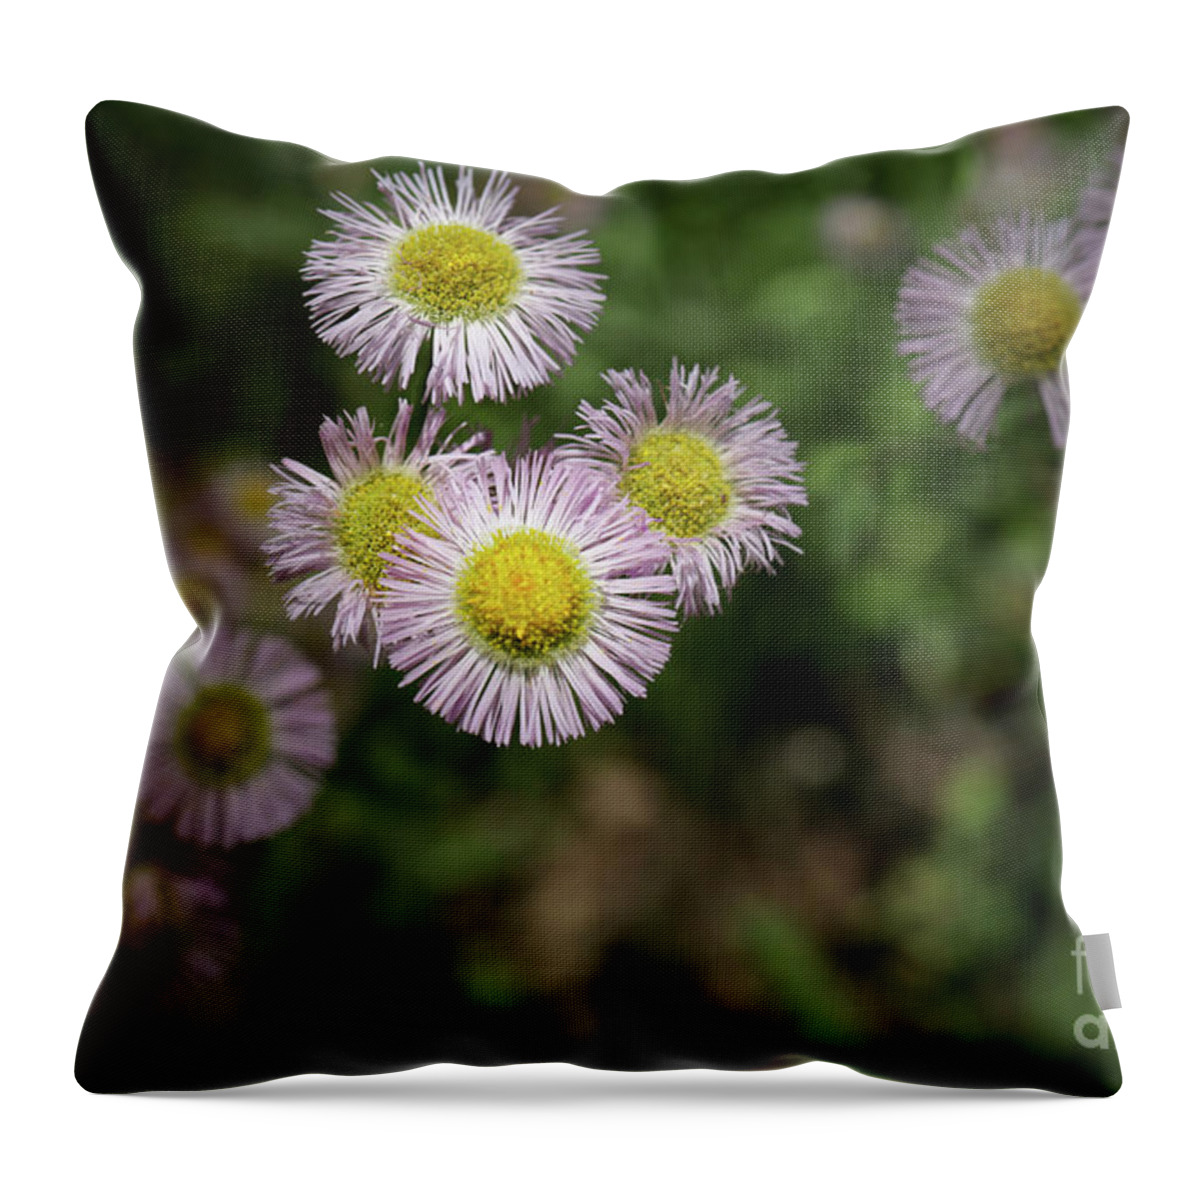 Daisy Throw Pillow featuring the photograph Purple Daisies by Coral Stengel